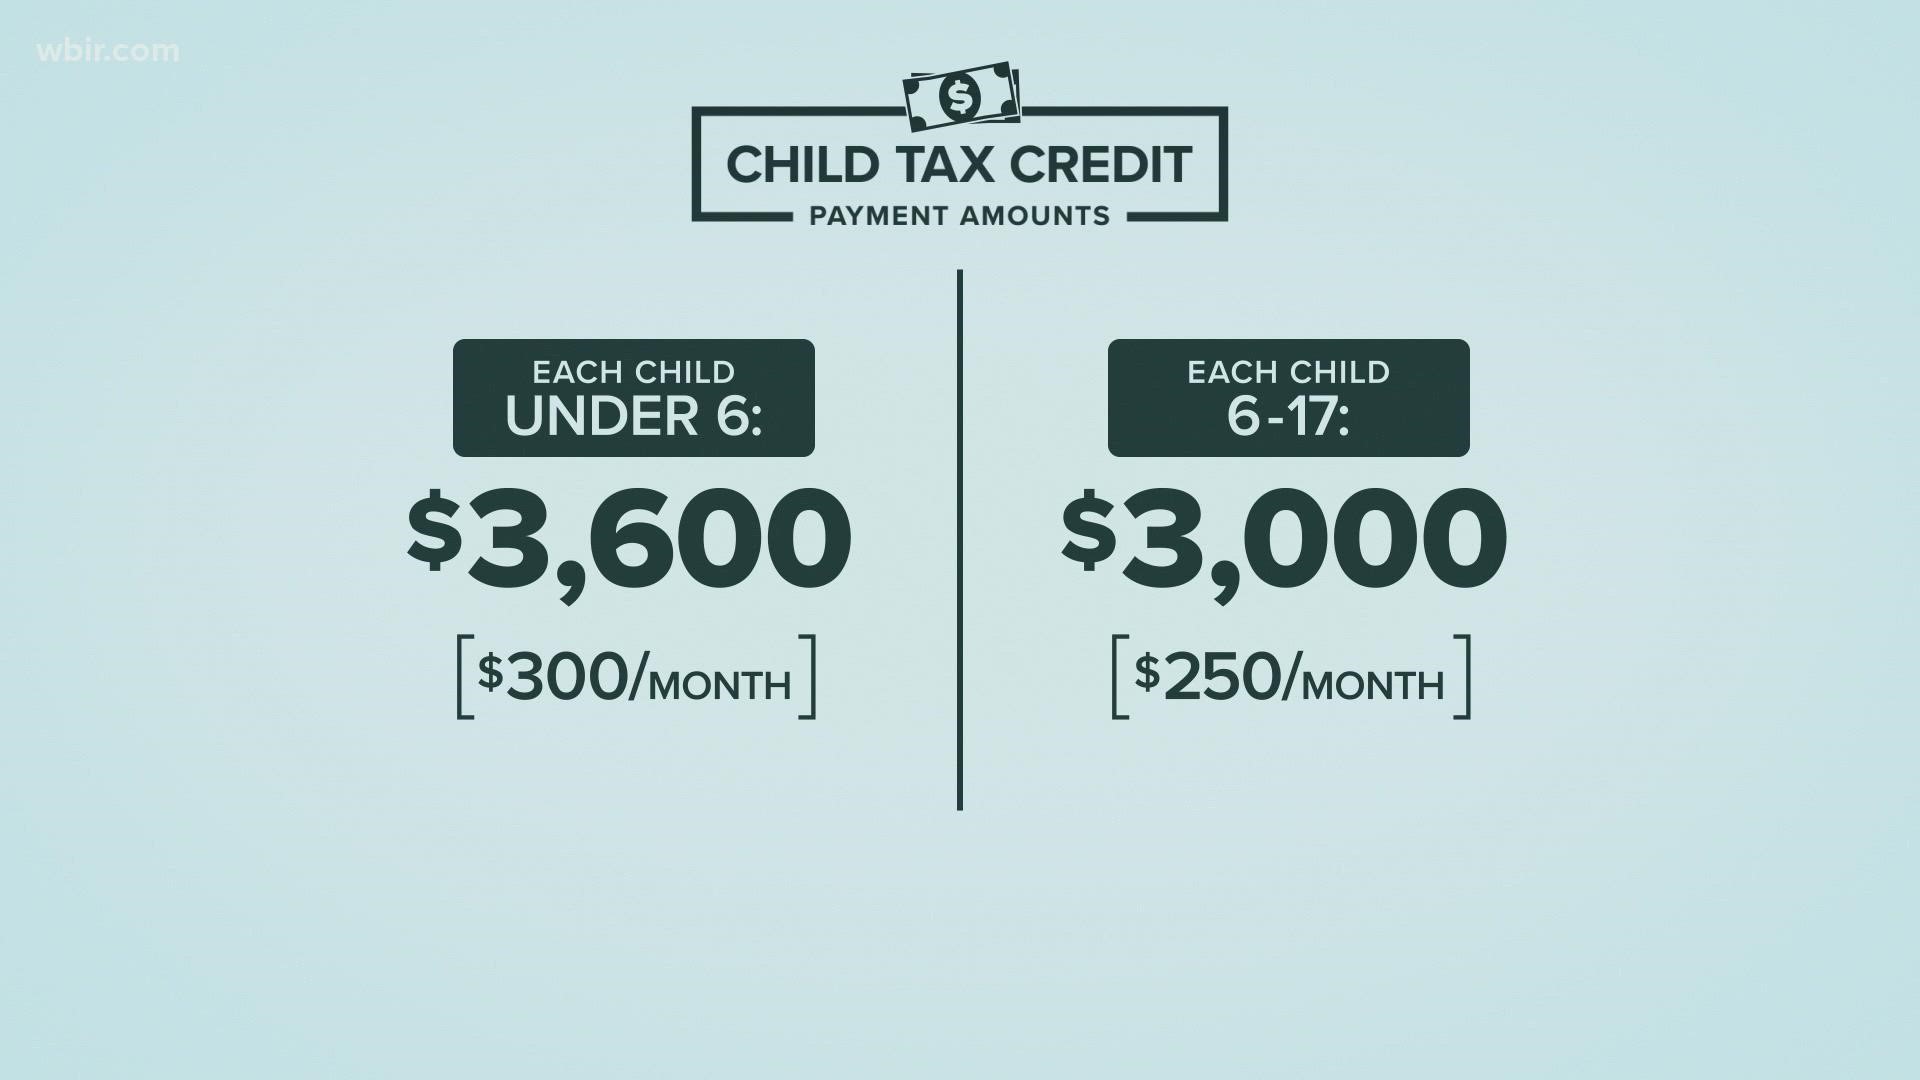 Most parents who get  that monthly payment should receive 250 to 300 dollars per child.